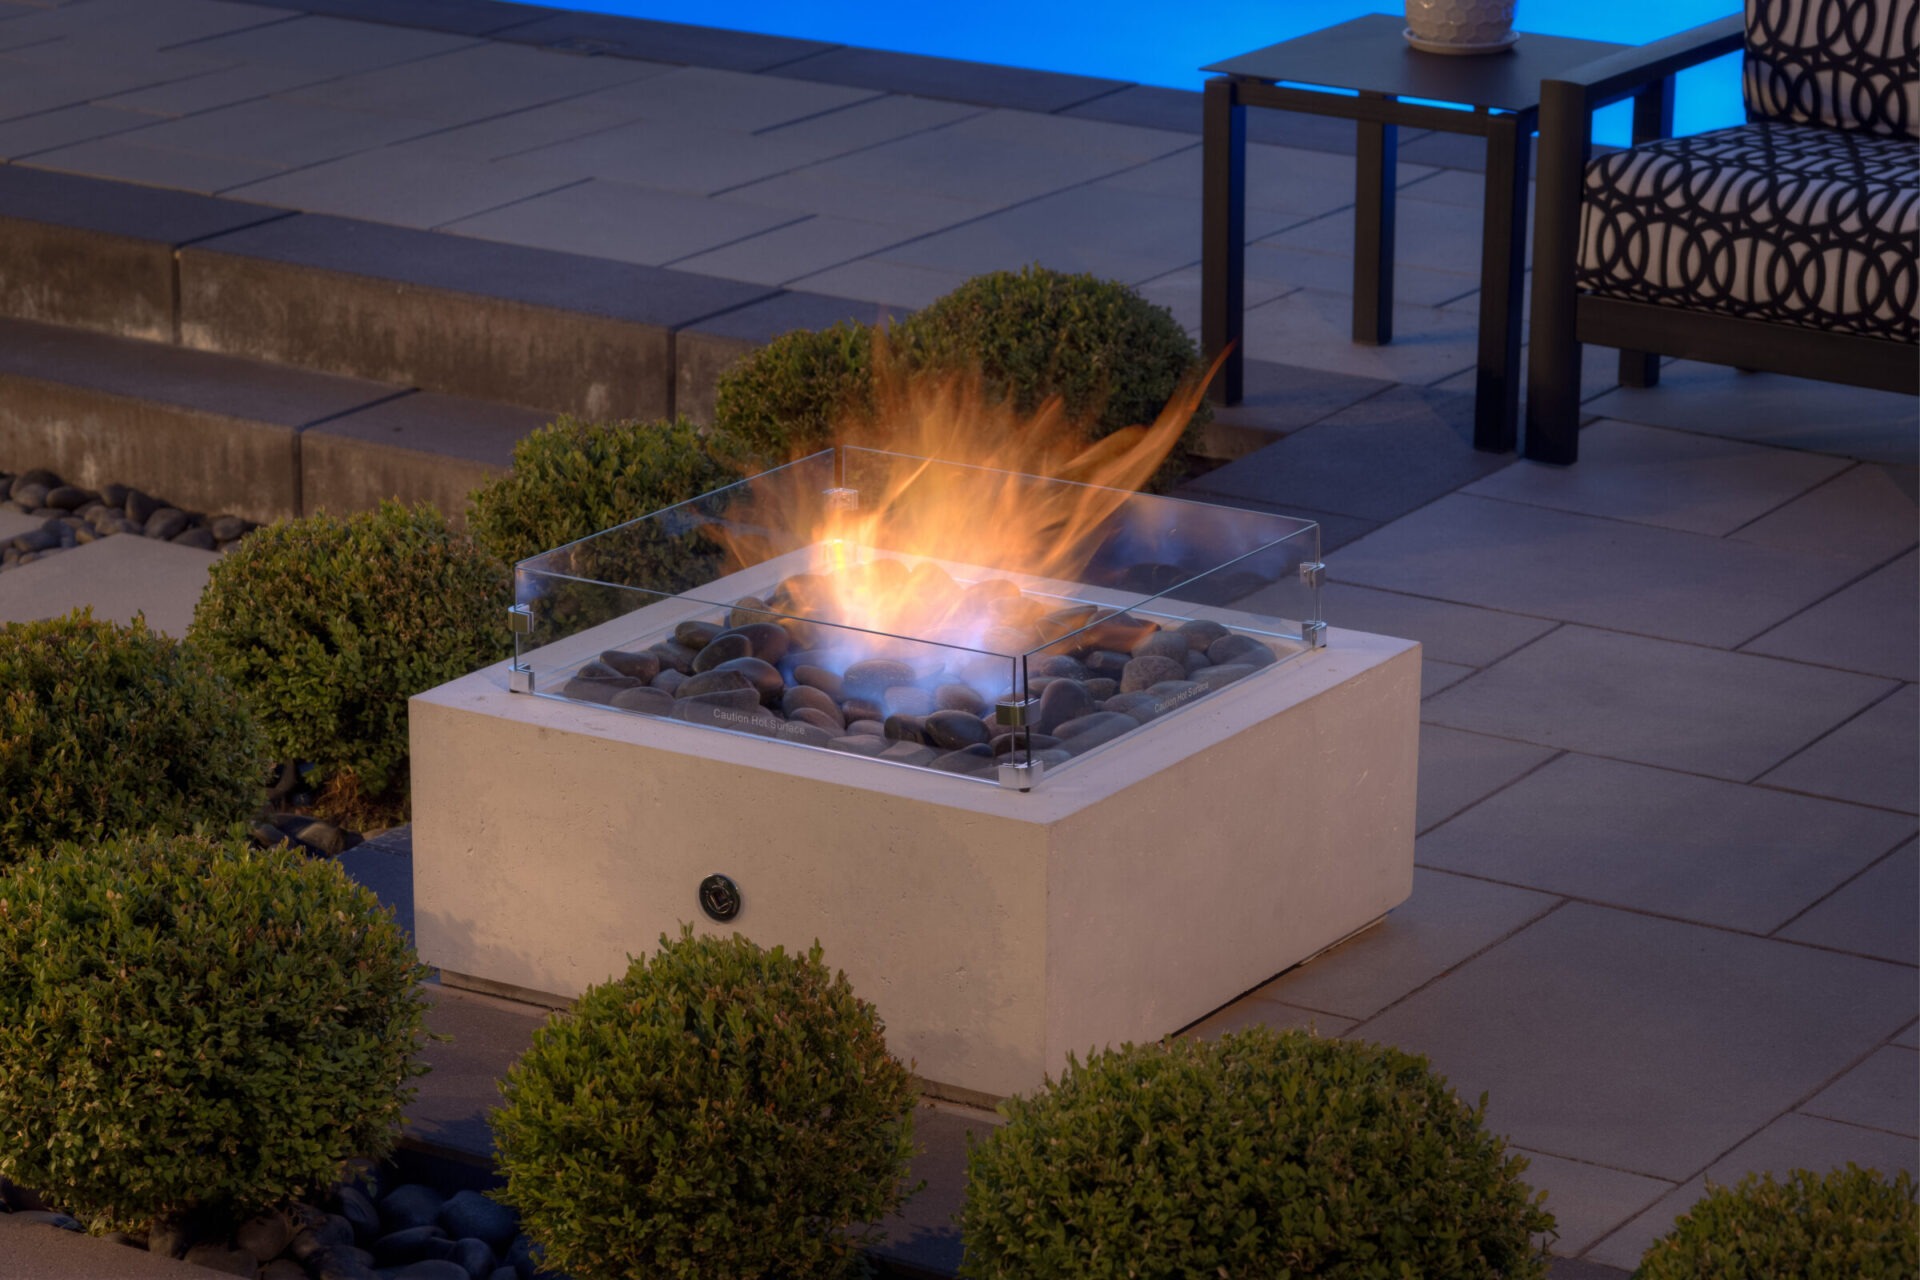 An outdoor gas fire pit with a glass shield surrounded by smooth stones and bushes is shown during twilight, complementing a stylish patio setup.